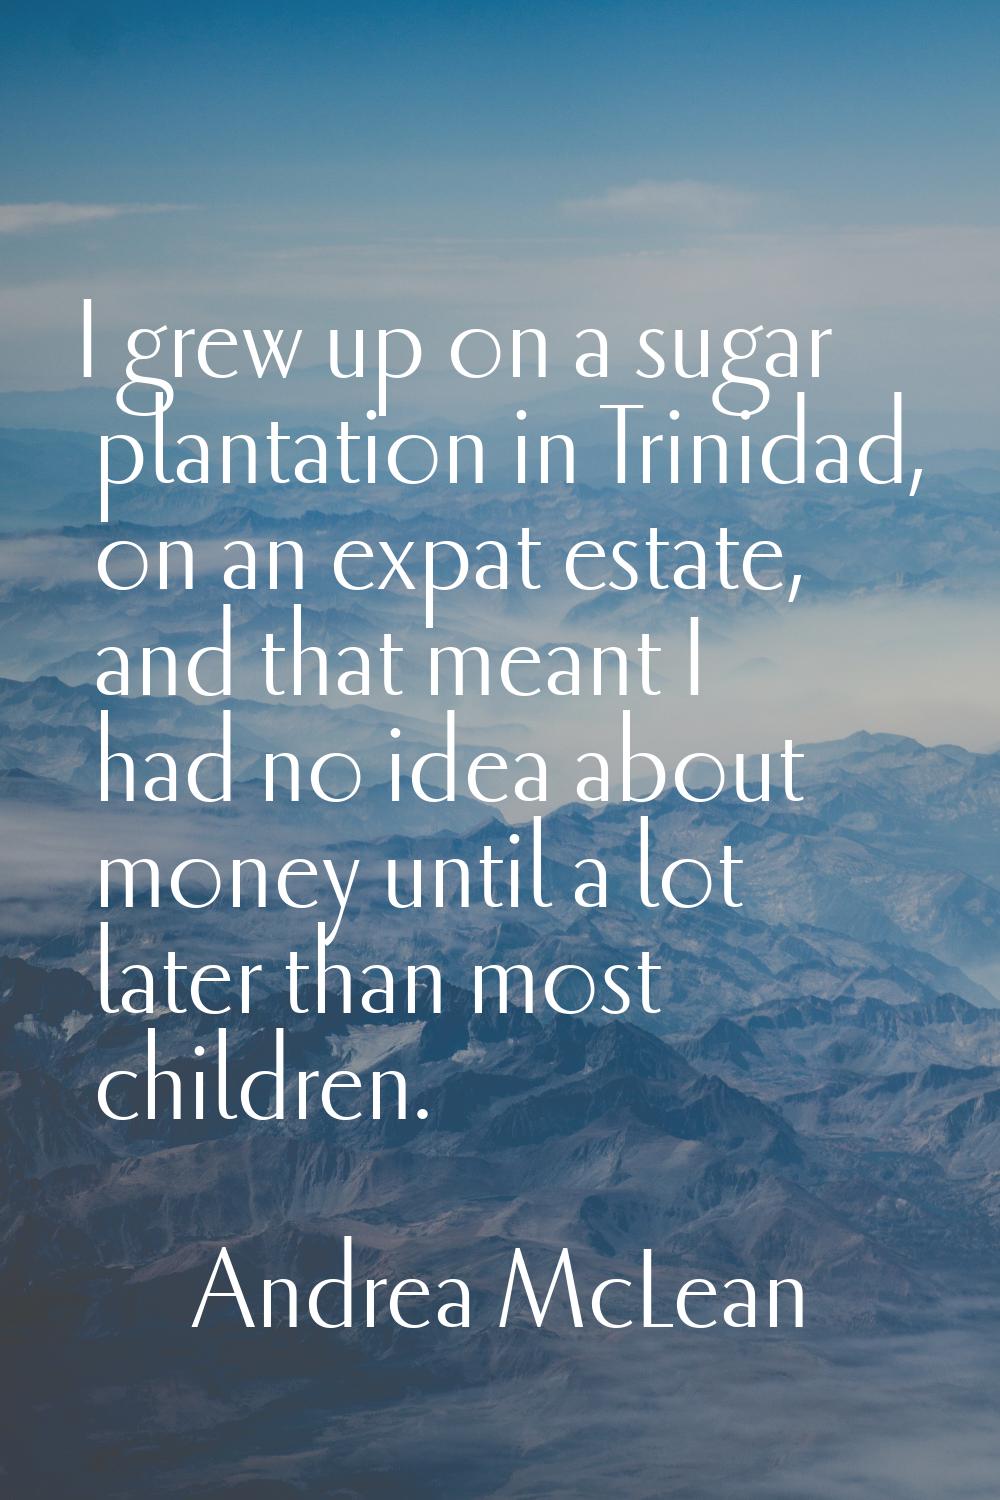 I grew up on a sugar plantation in Trinidad, on an expat estate, and that meant I had no idea about